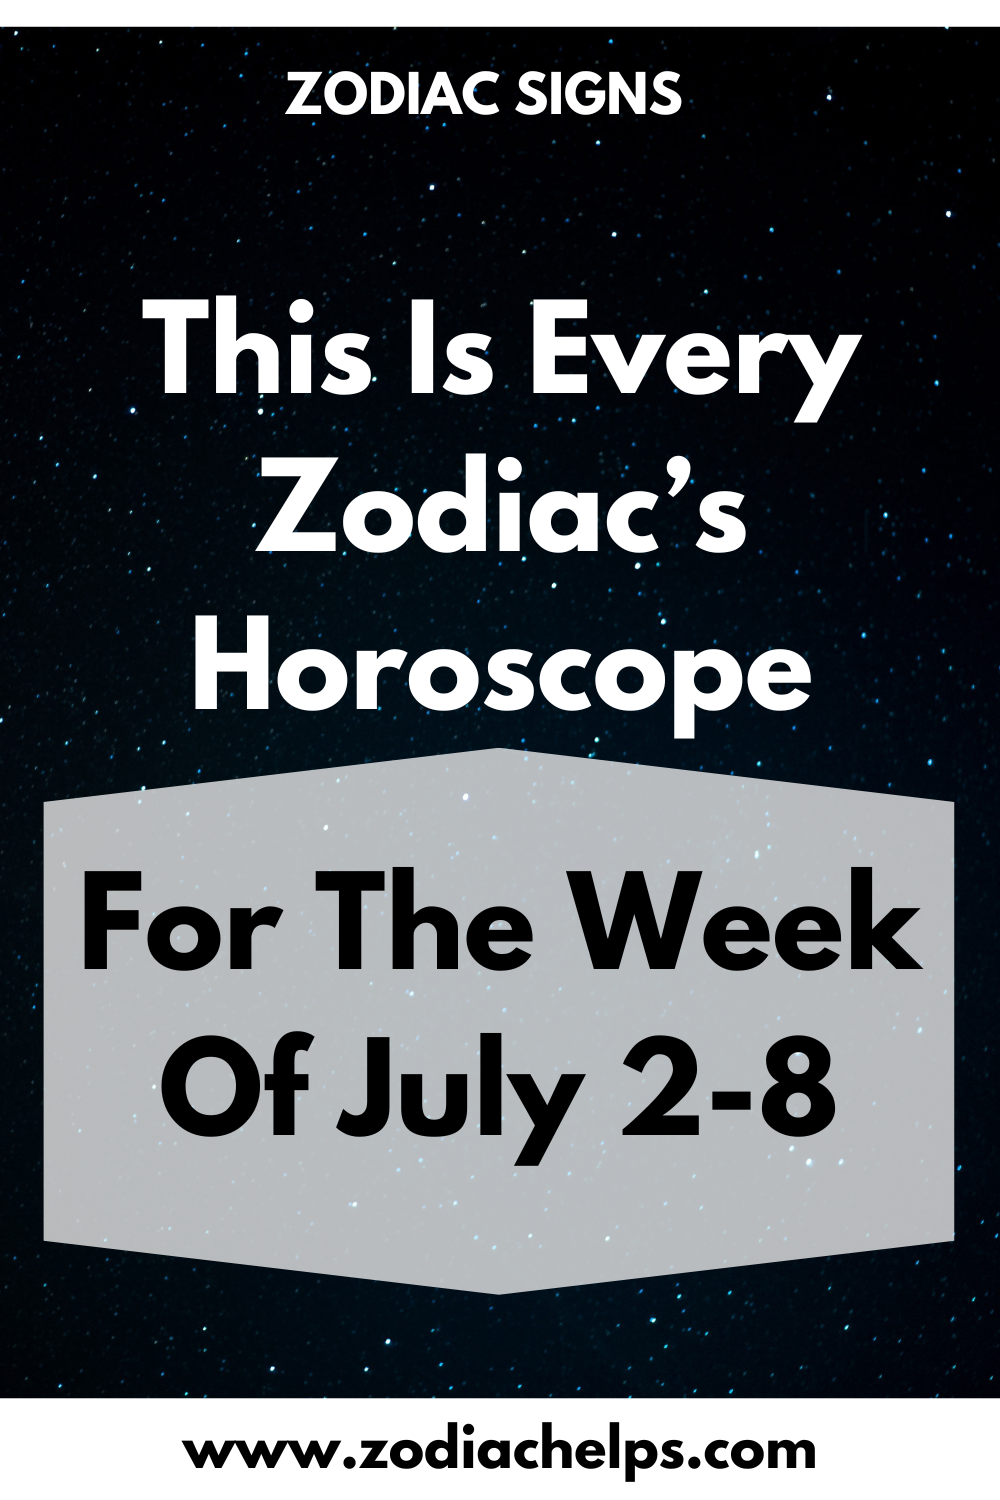 This Is Every Zodiac’s Horoscope For The Week Of July 2-8